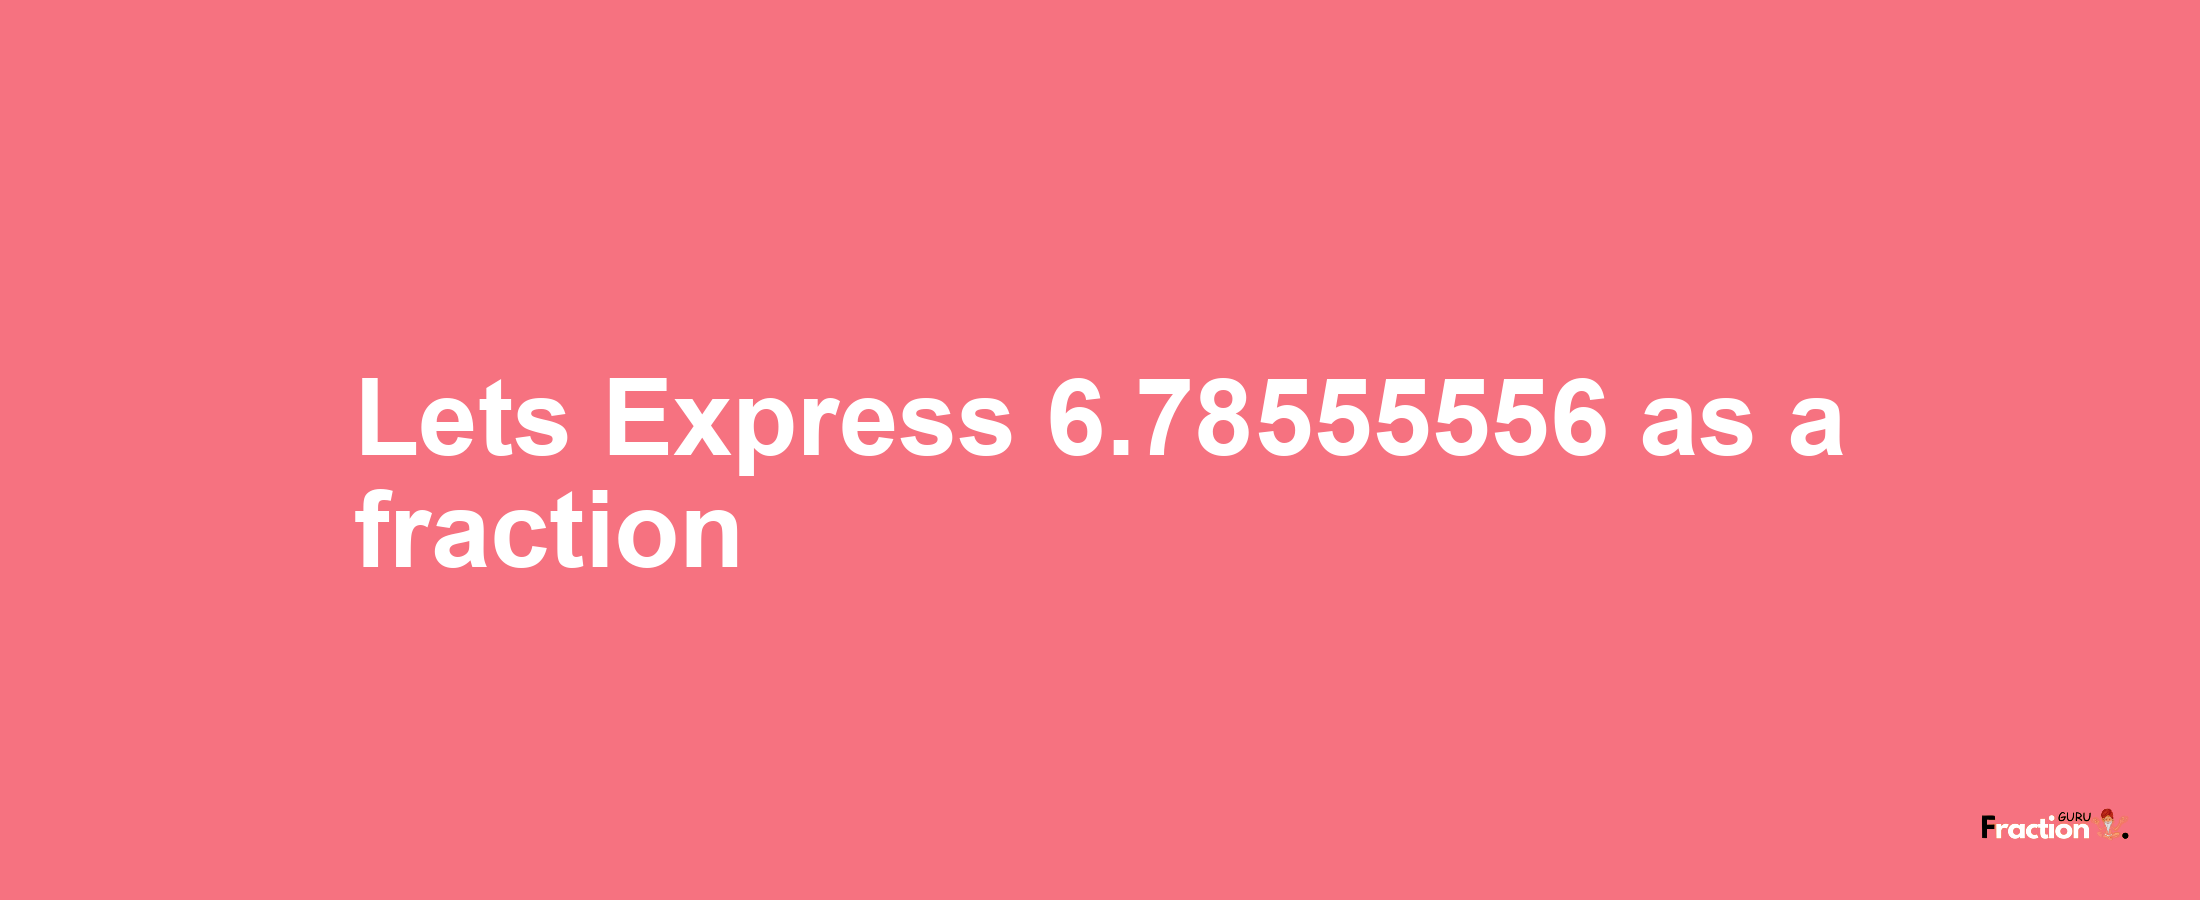 Lets Express 6.78555556 as afraction